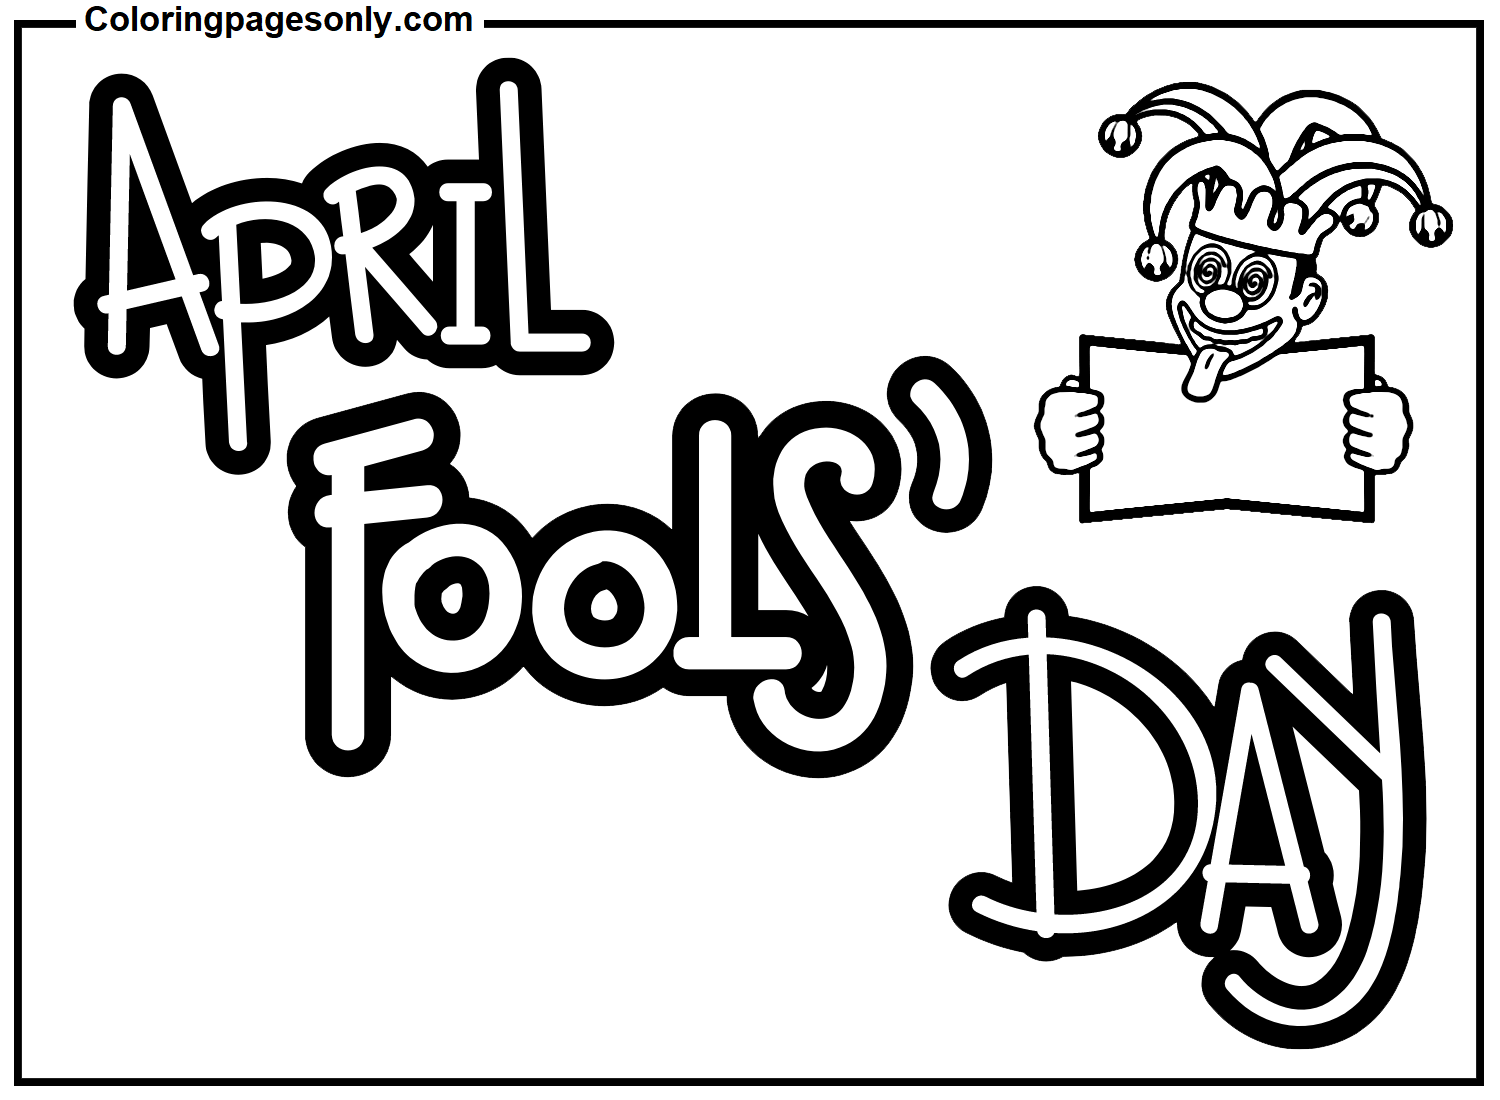 April Fools' Day Pictures Coloring Pages